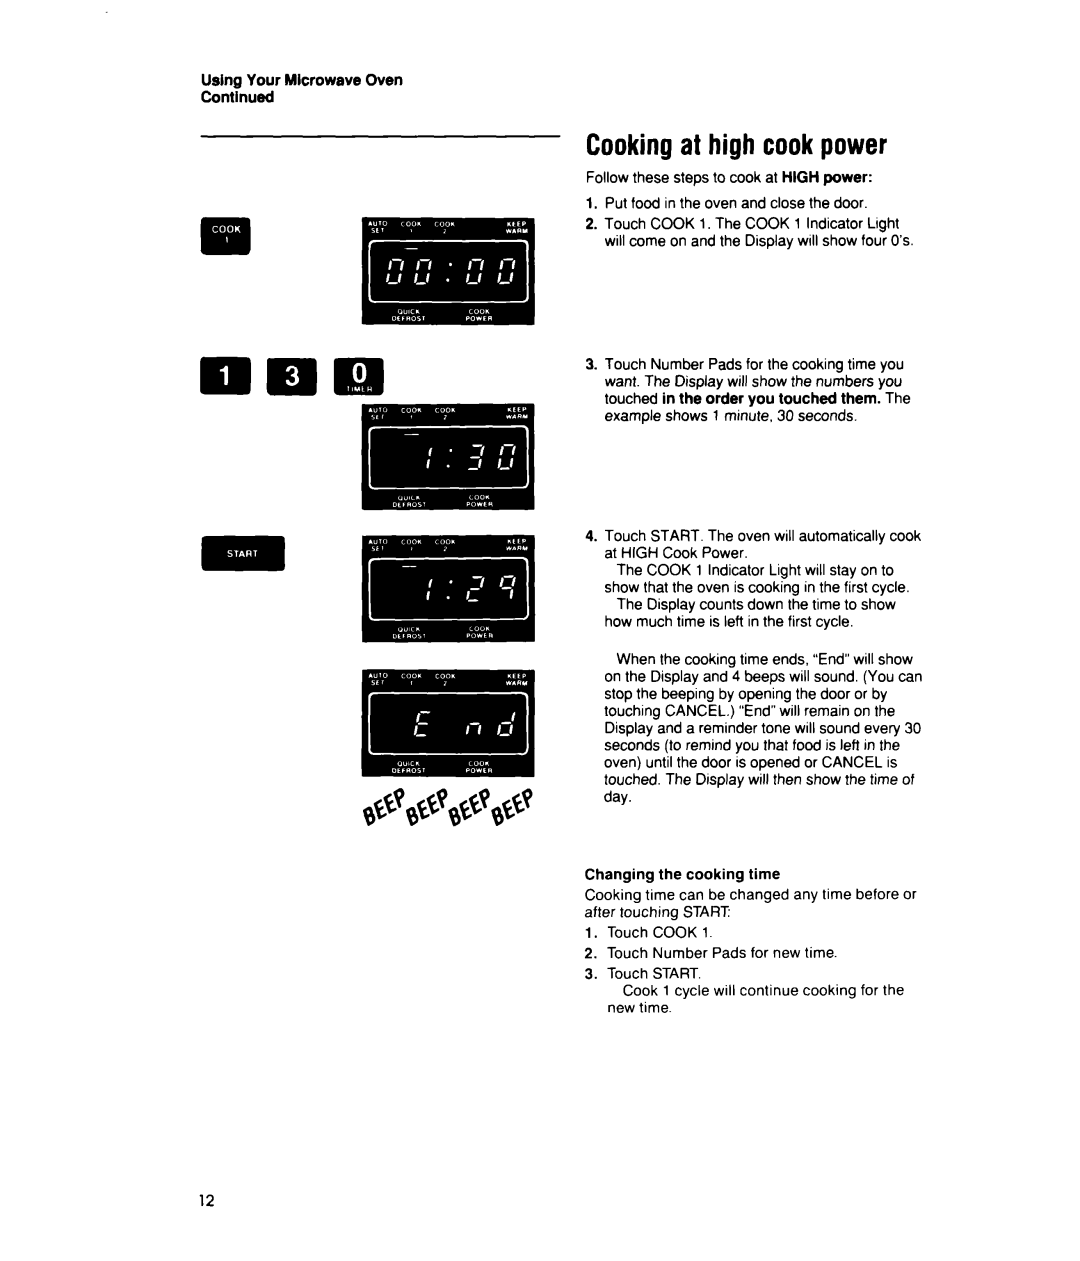 Whirlpool MTZ080XY user manual Cooking at high cook power 